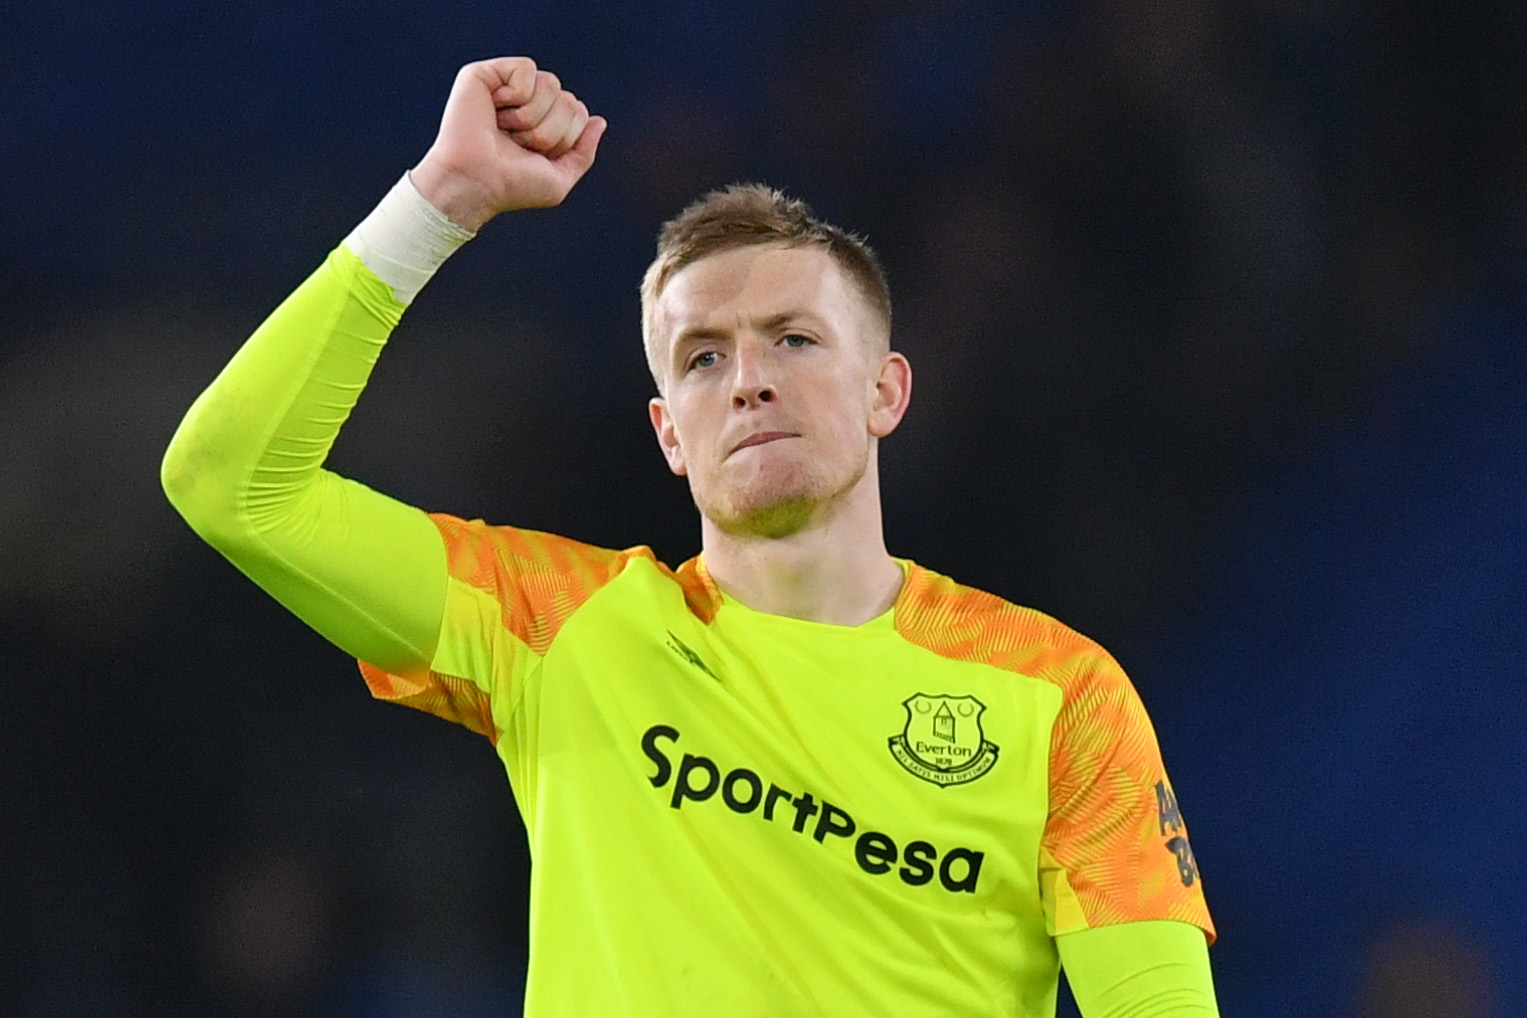 Jordan Pickford will hope to avoid a repeat of his inexplicable howler in the reverse fixture. (Photo by Dan Mullan/Getty Images)